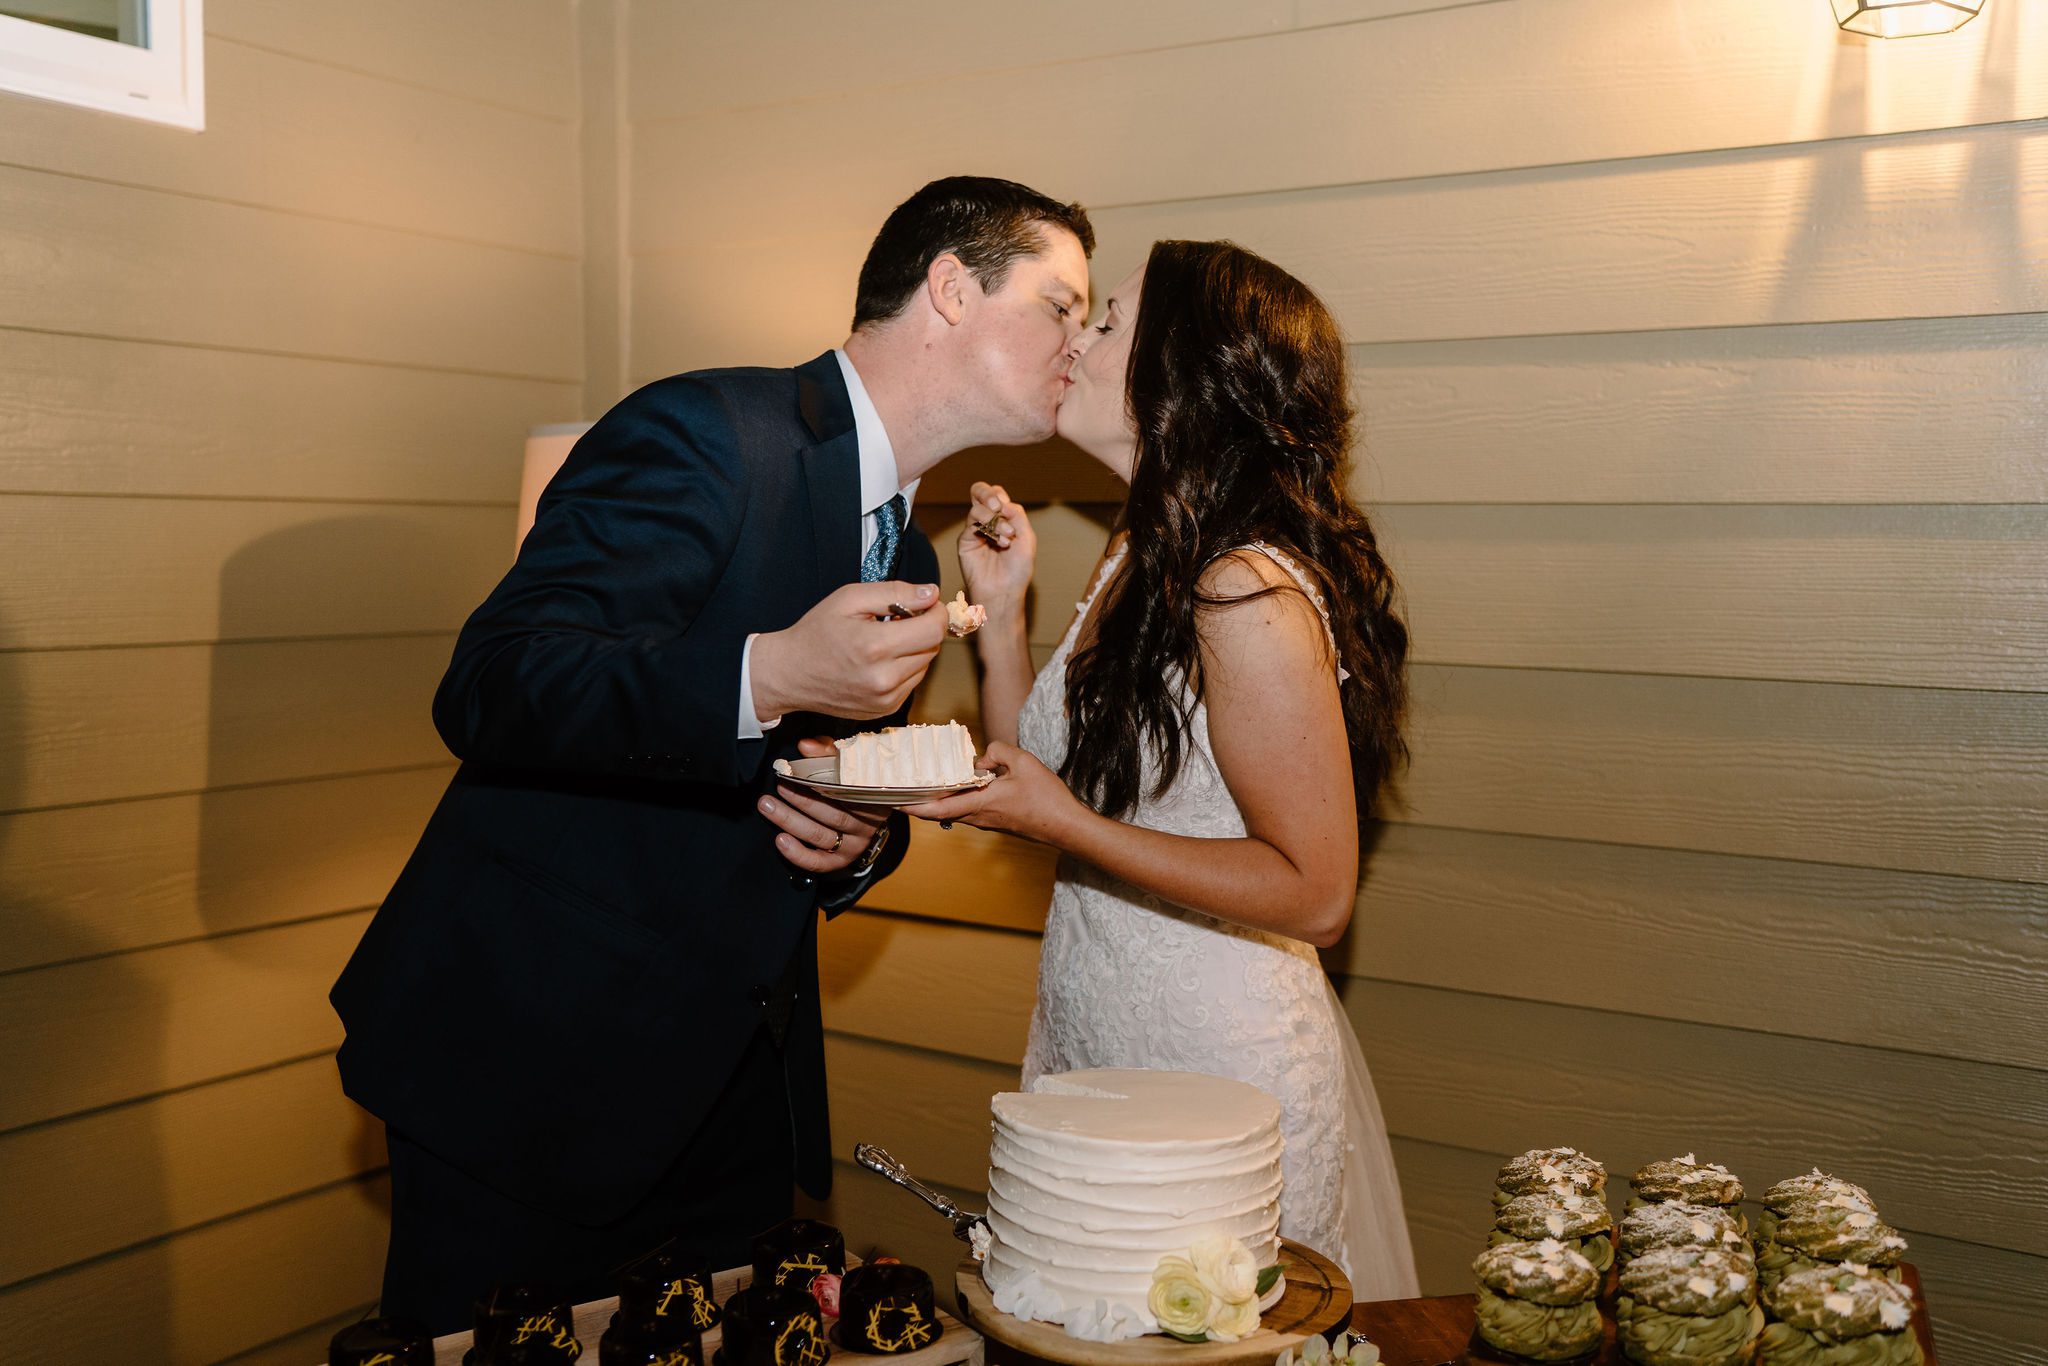 Greensboro bridal photos with gorgeous bride and groom in an intimate setting